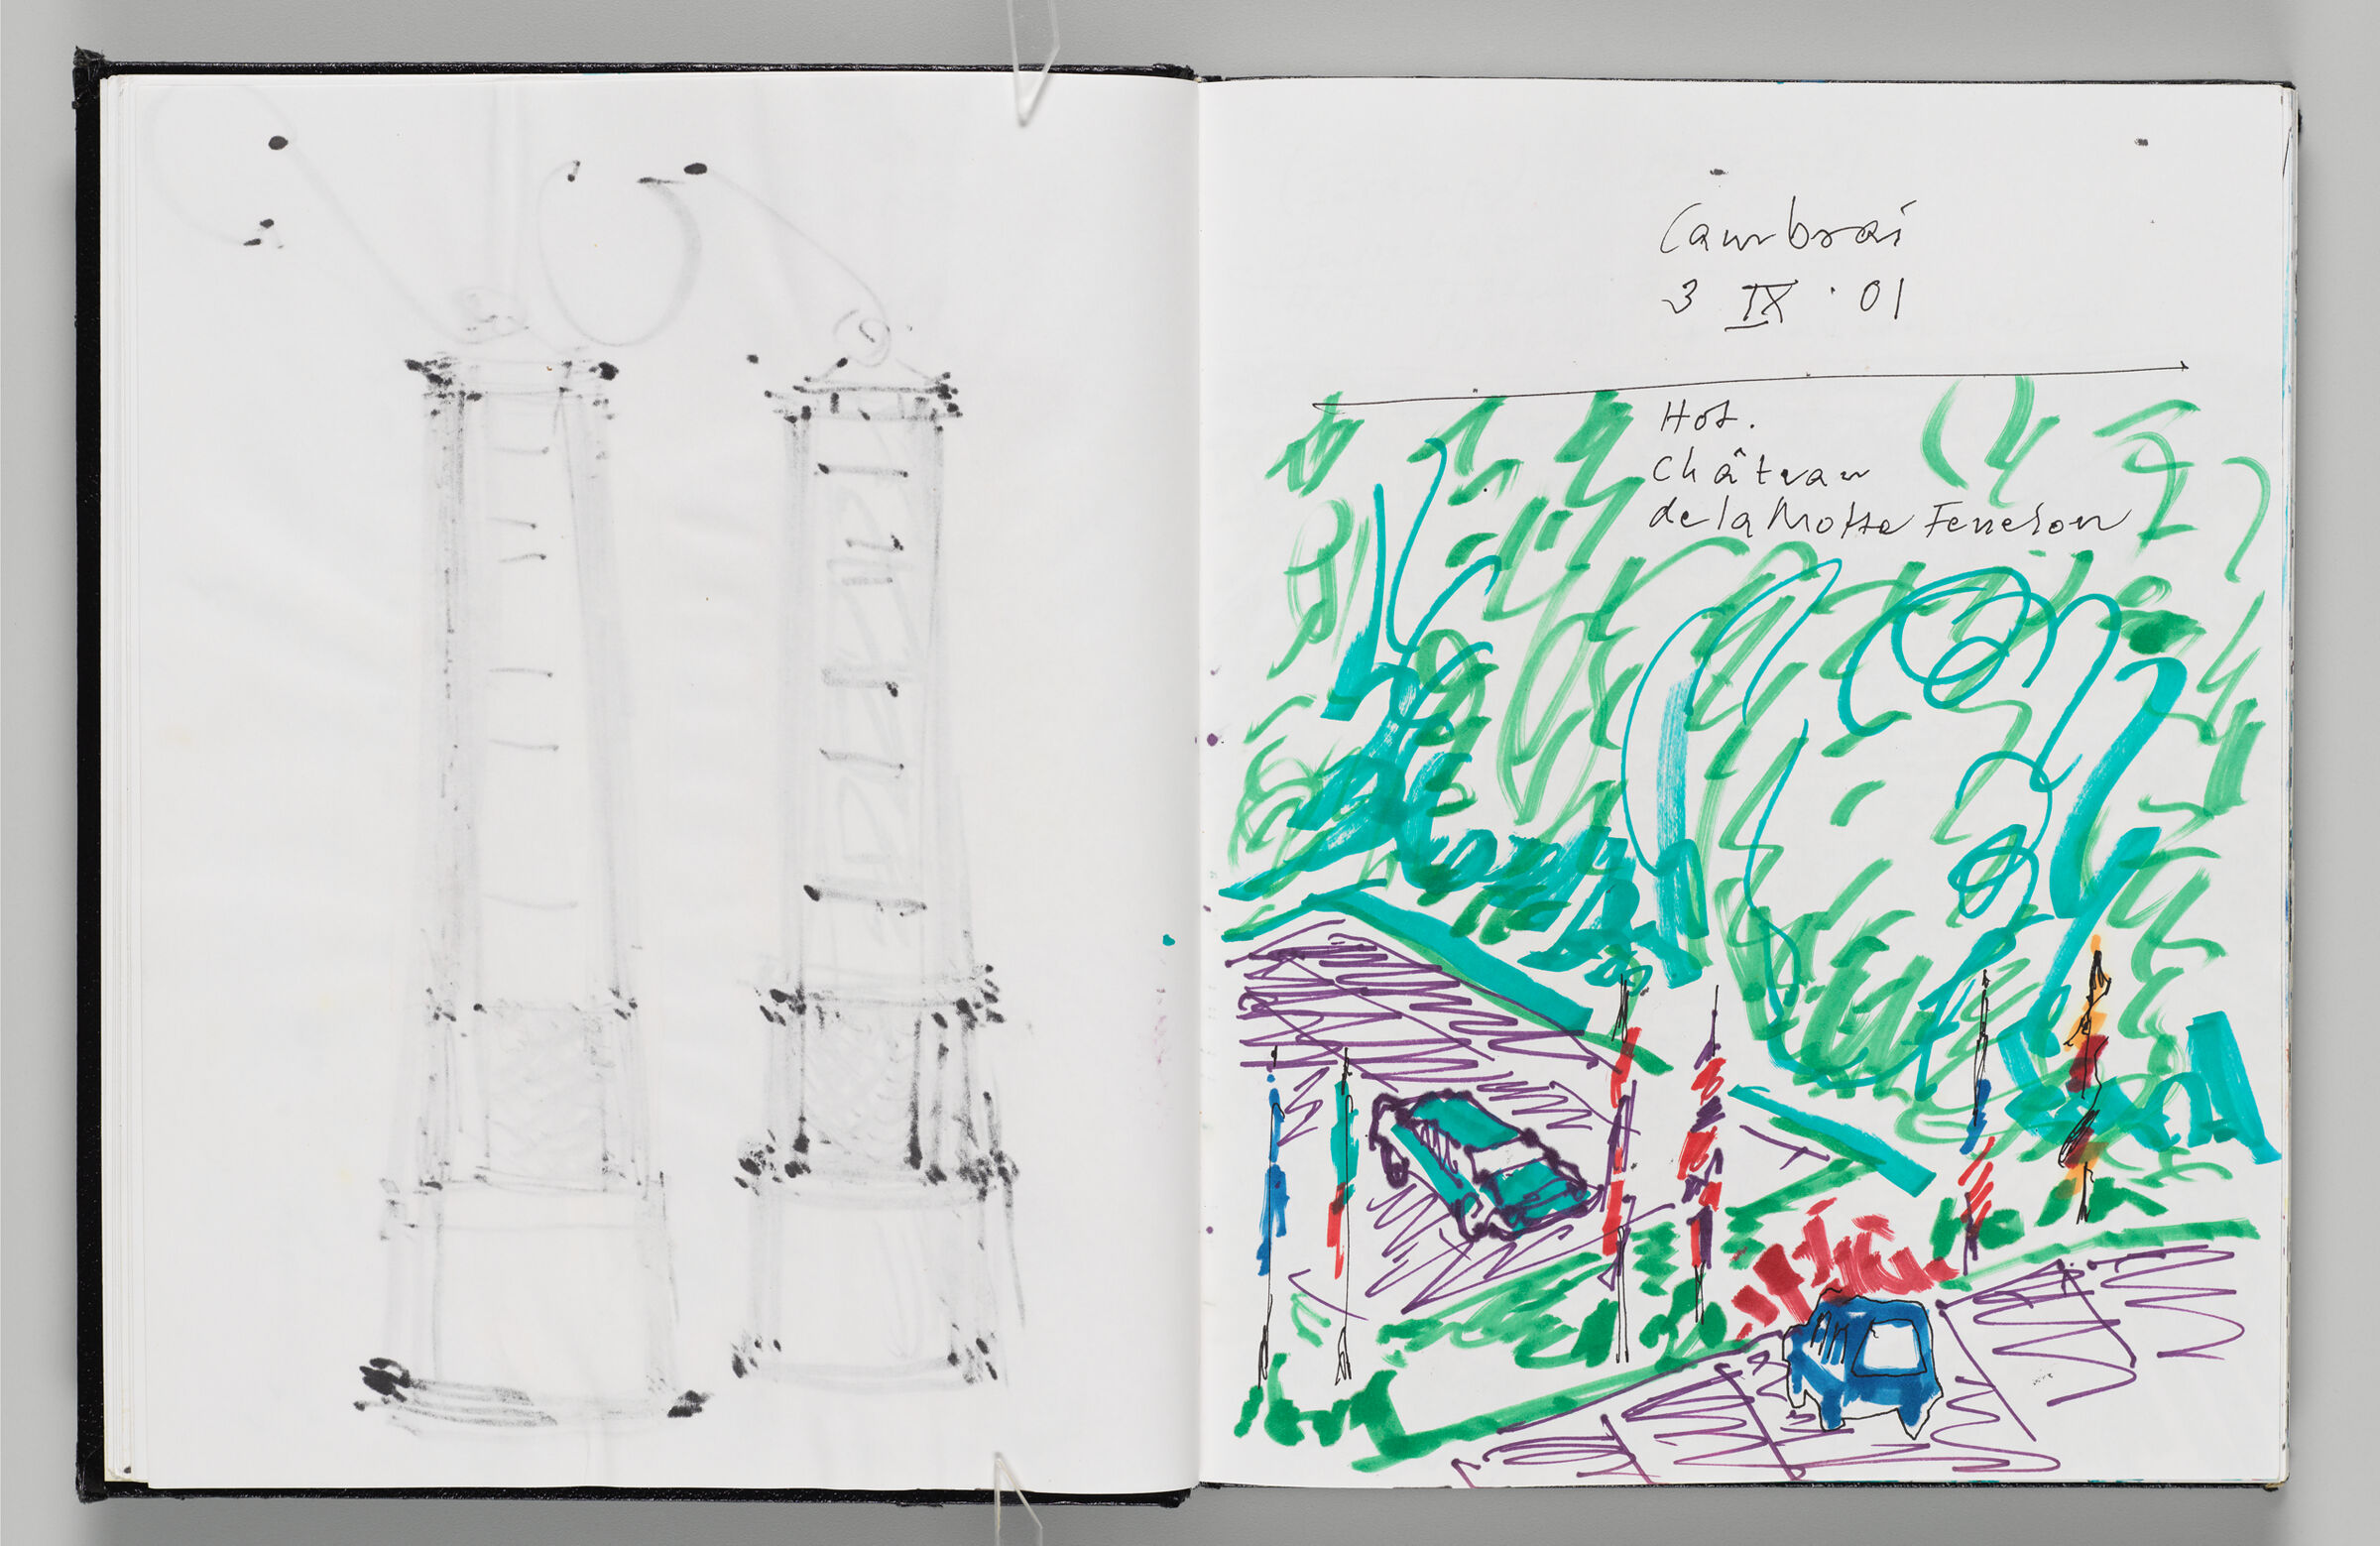 Untitled (Bleed-Through Of Previous Page, Left Page); Untitled (Cars In Parking Lot Next To Landscape, Right Page)